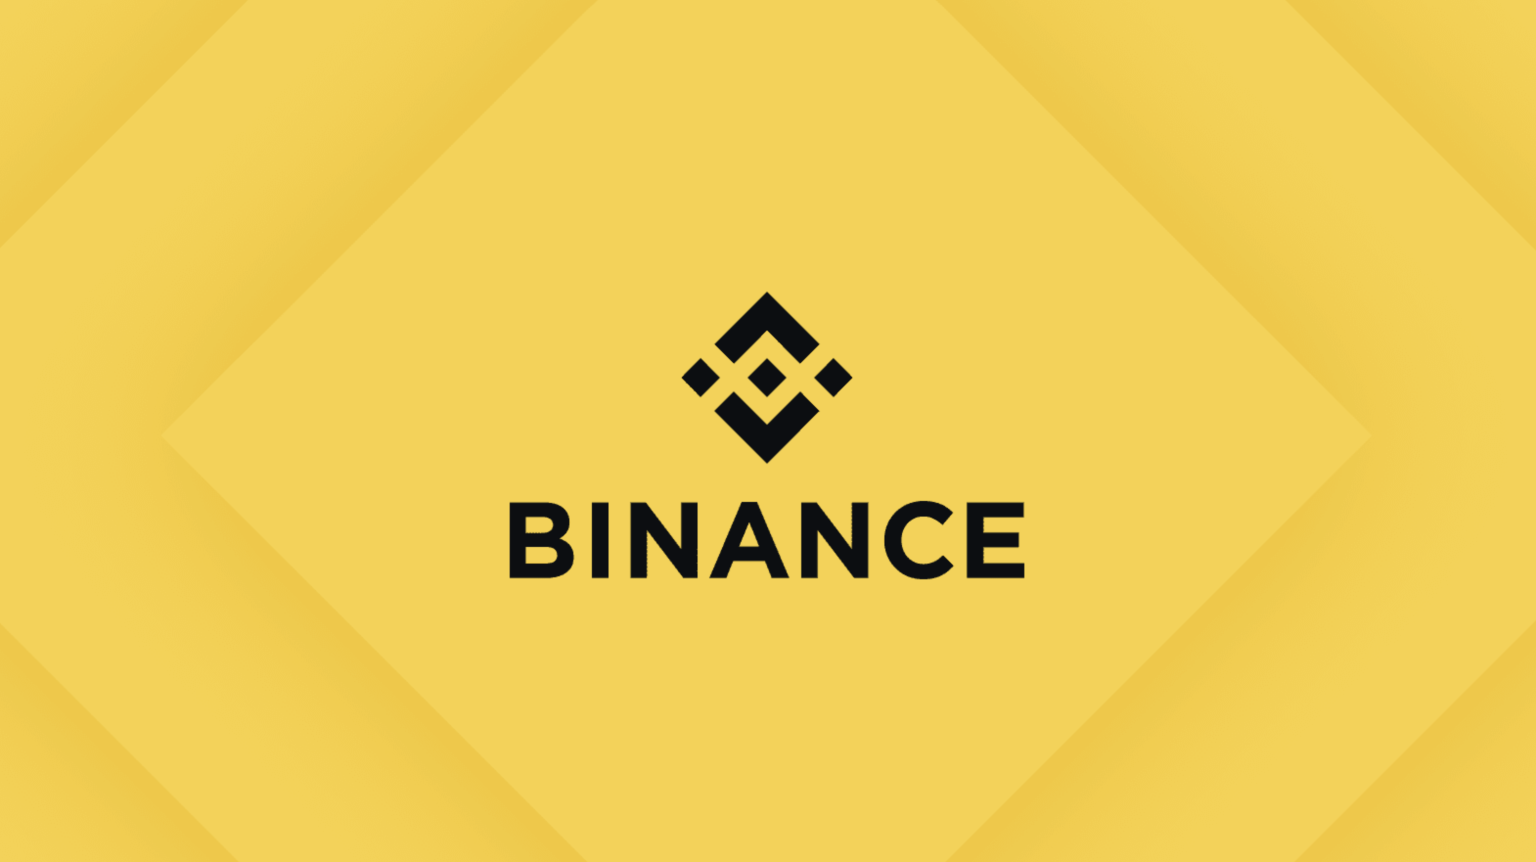 Binance Review 2021: Is It A Legit Crypto Platform Or Scam?